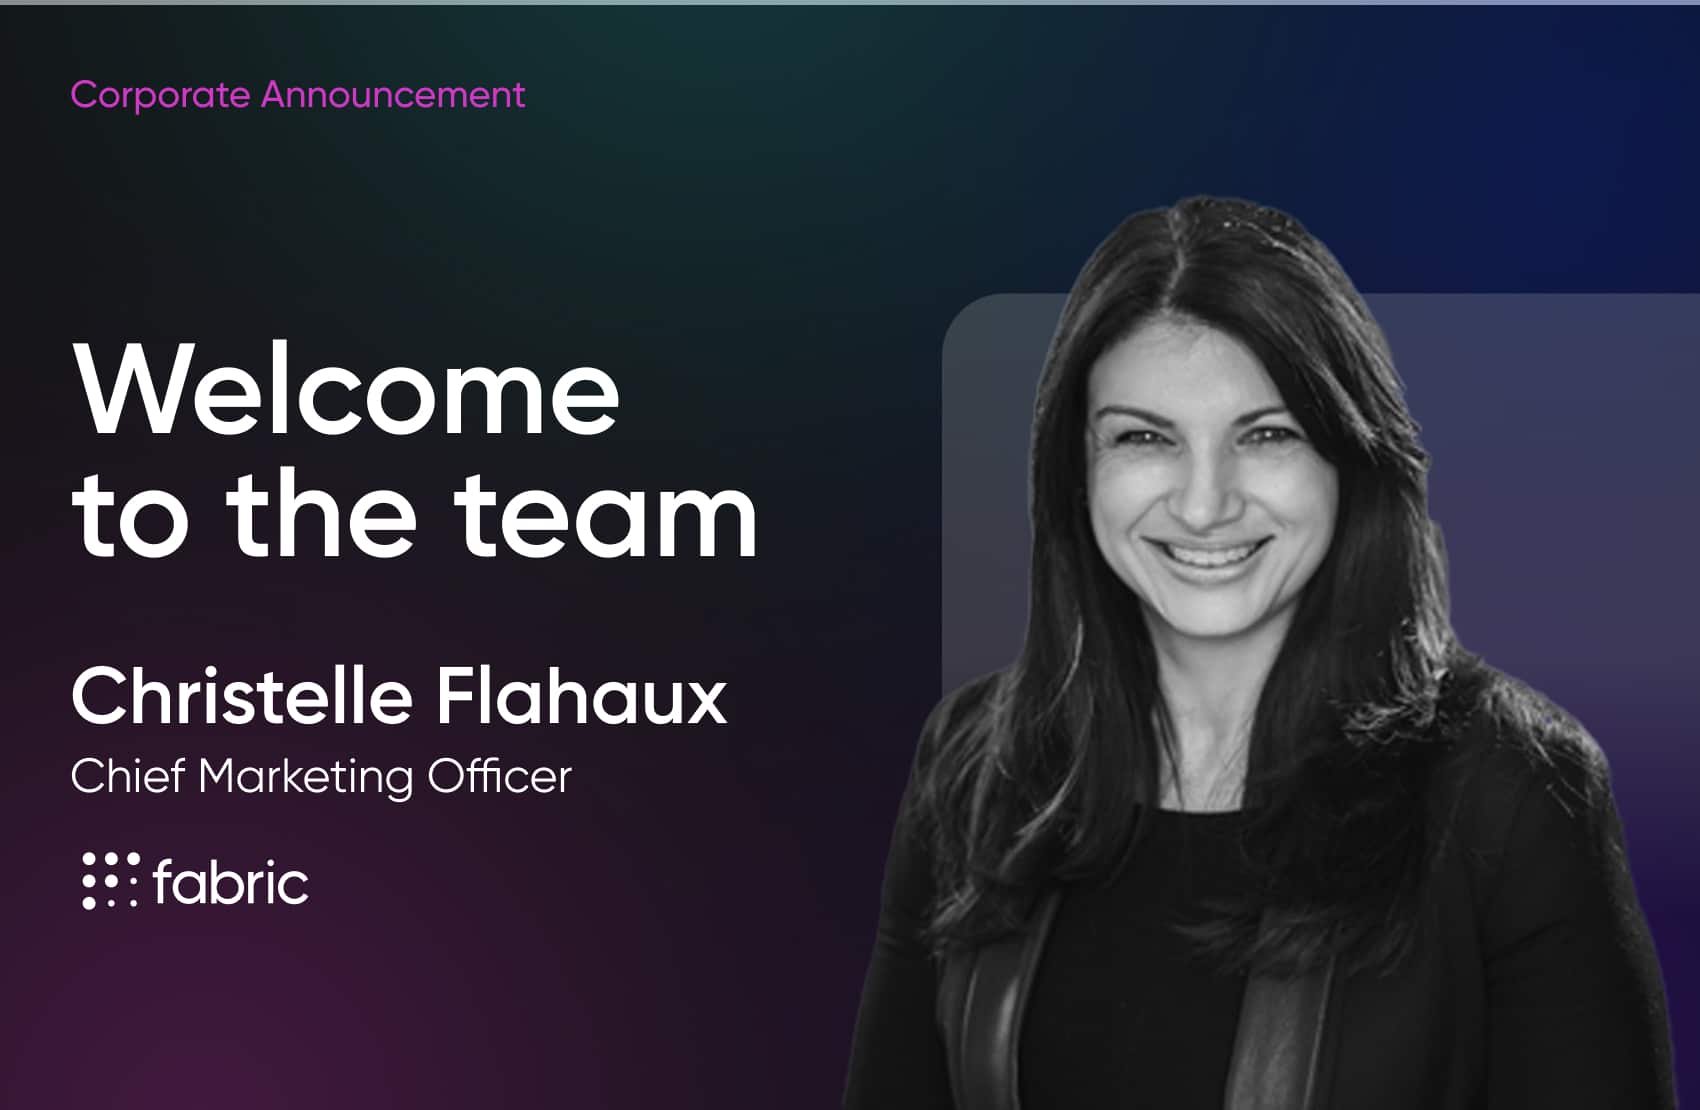 blog header announcing christelle flahaux as the new CMO